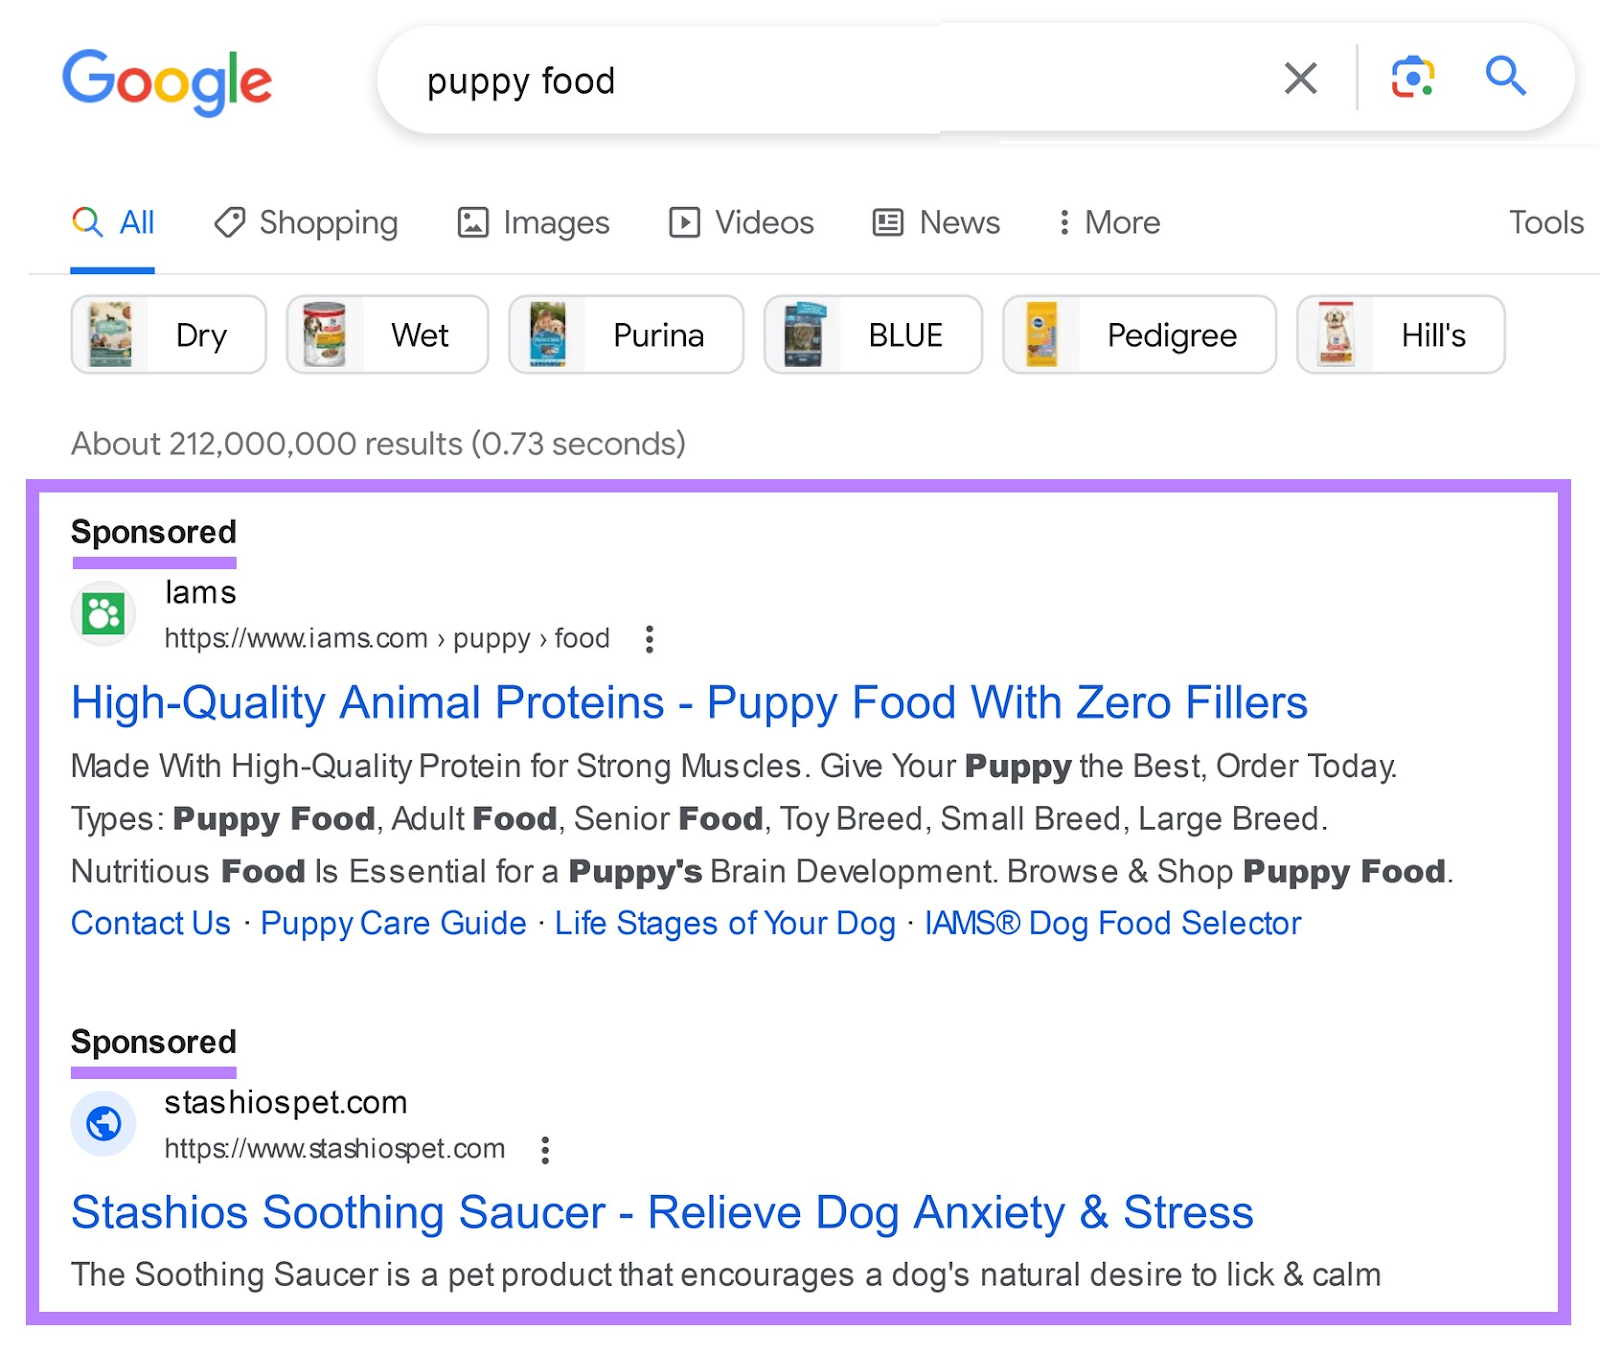 Google Ads for "puppy food" query appearing above search results